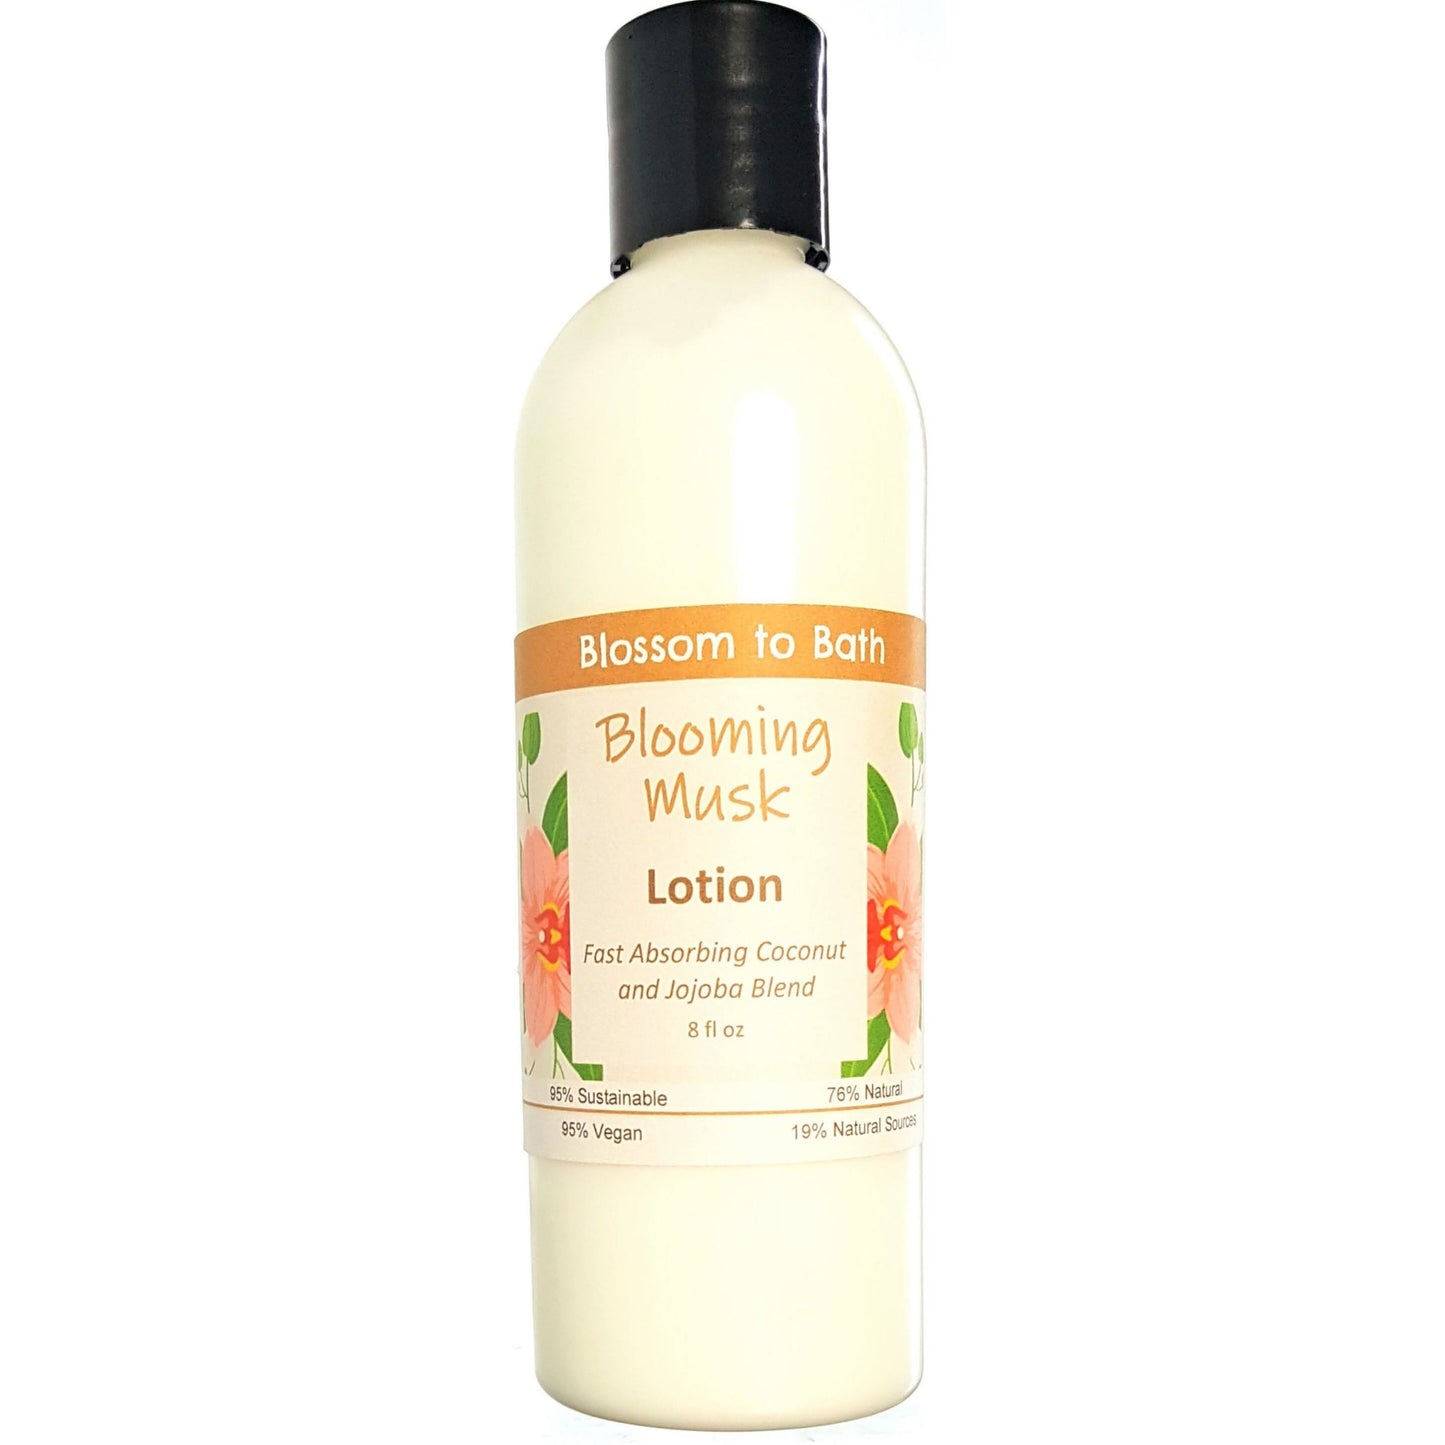 Buy Blossom to Bath Blooming Musk Lotion from Flowersong Soap Studio.  Daily moisture  that soaks in quickly made with organic oils and butters that soften and smooth the skin  A sensual floral and musk scent that is subtle and feminine.